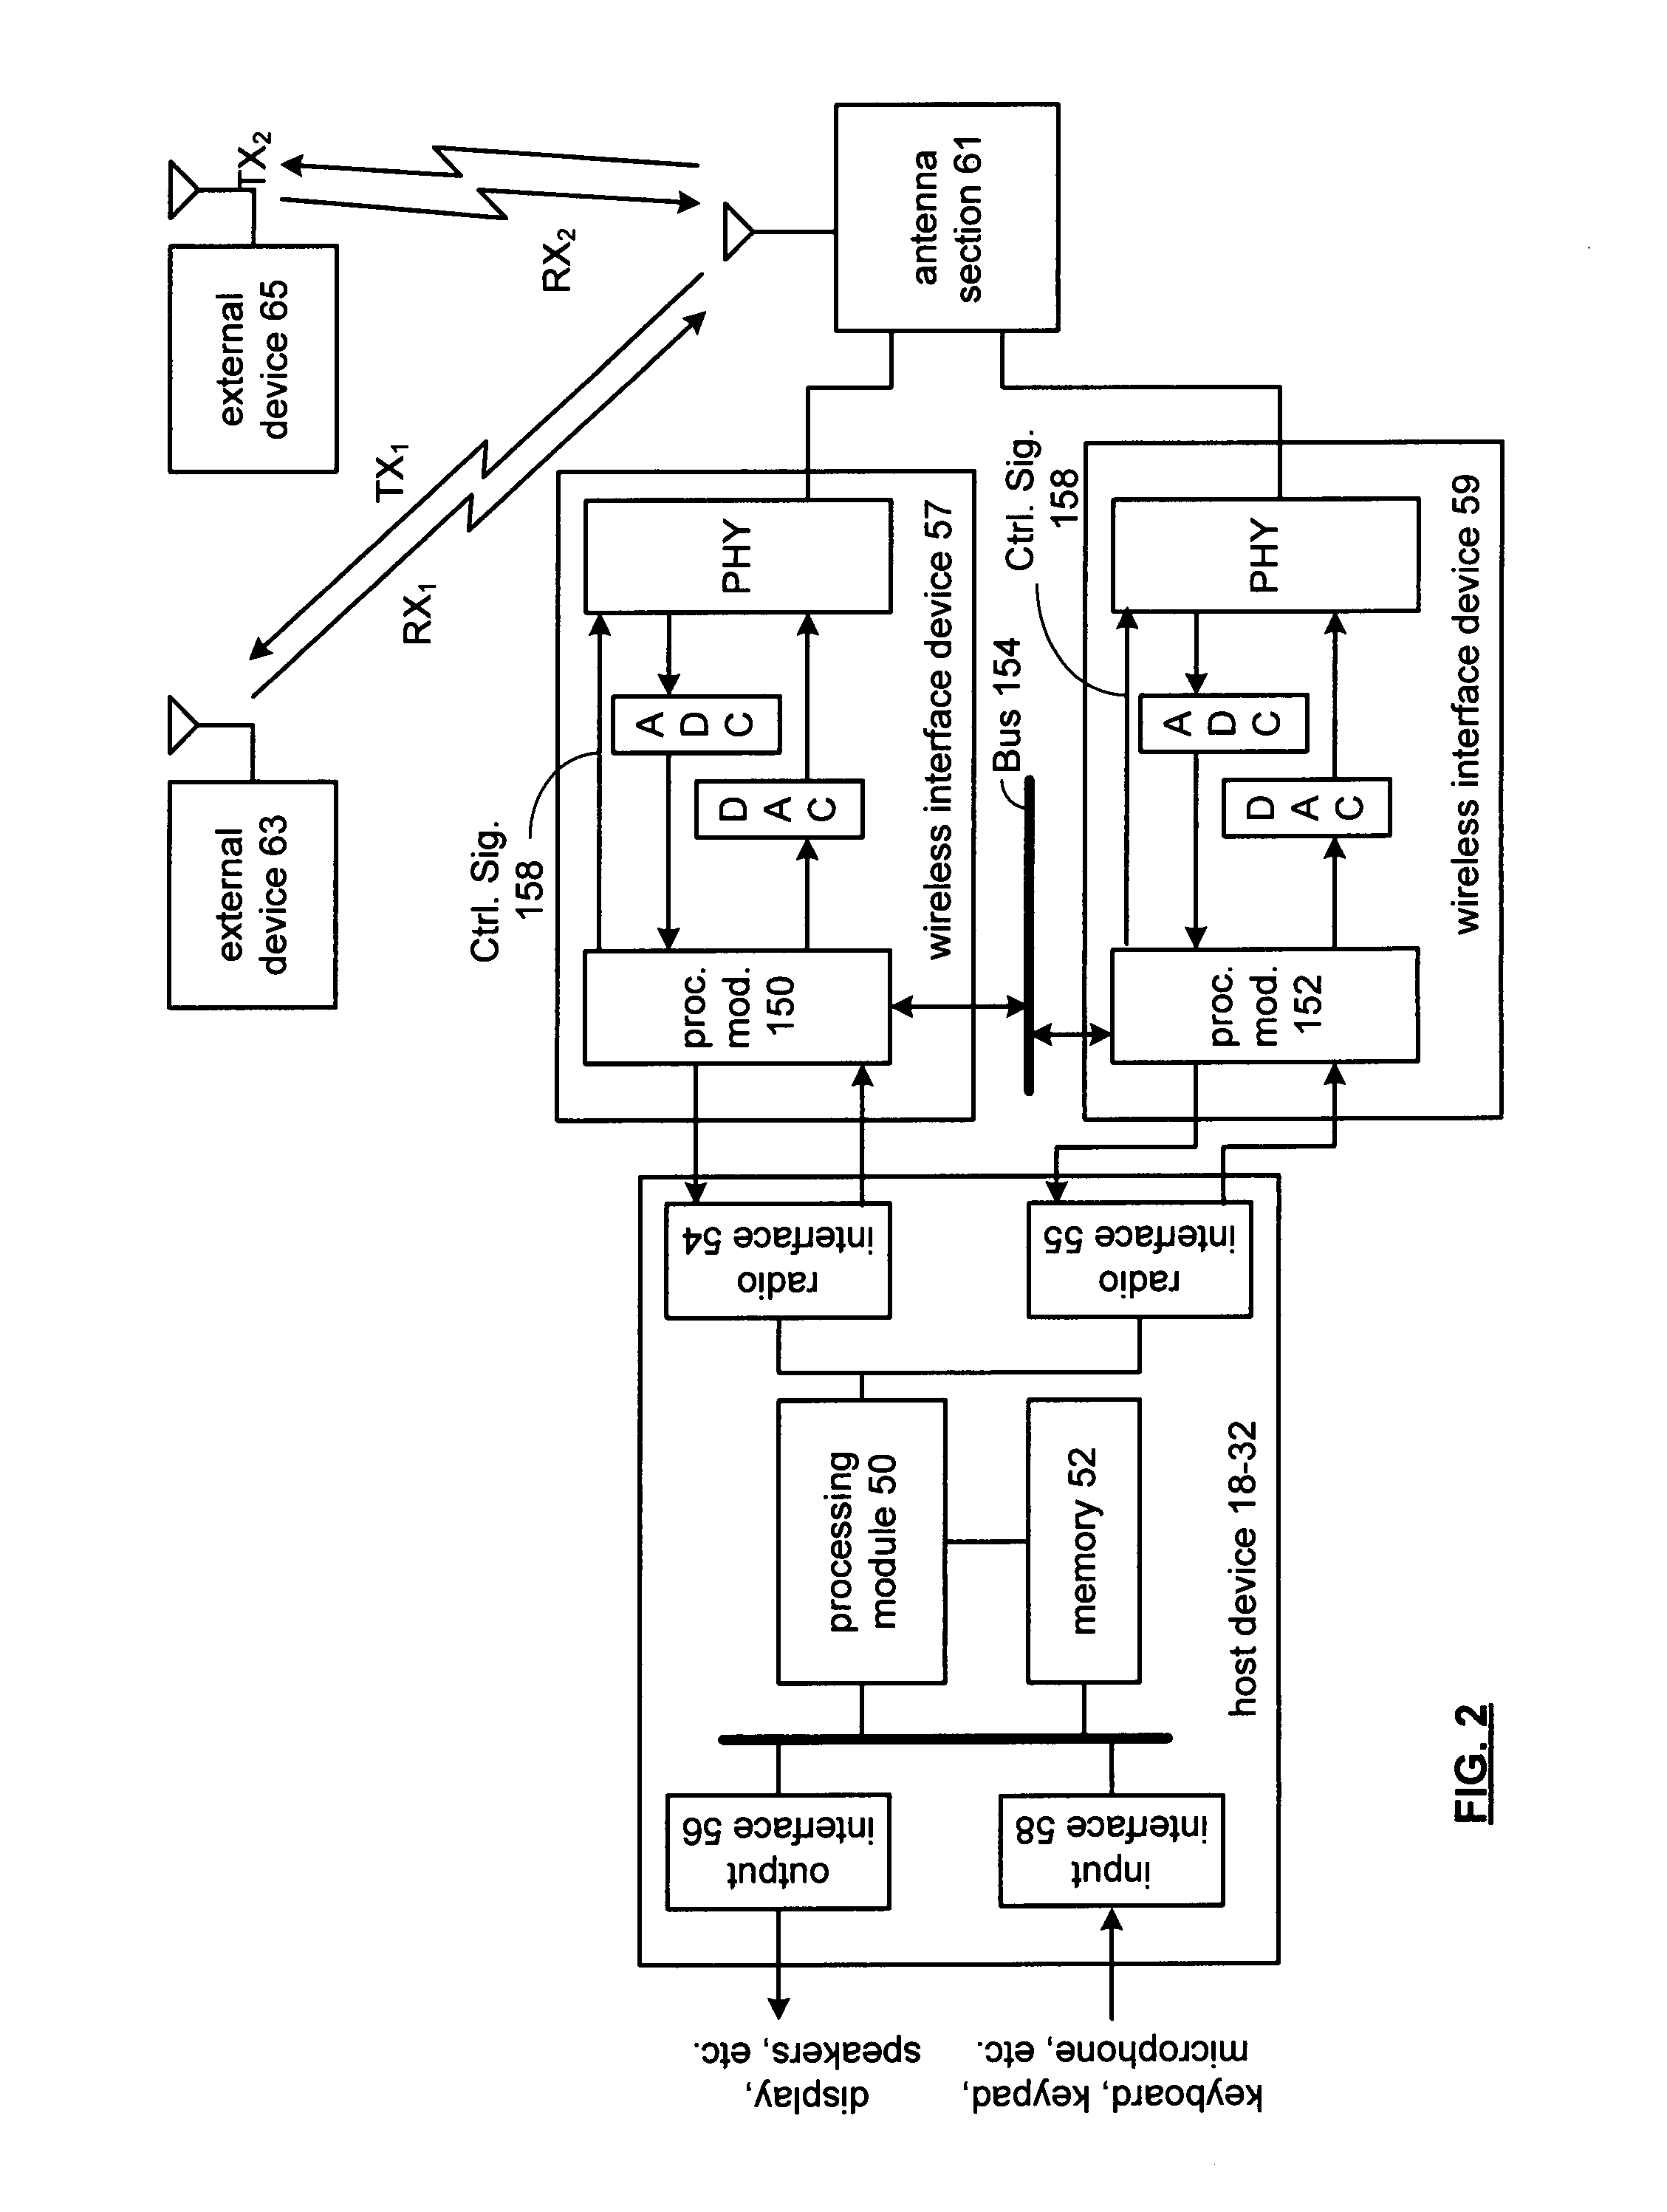 High speed data bus for communicating between wireless interface devices of a host device